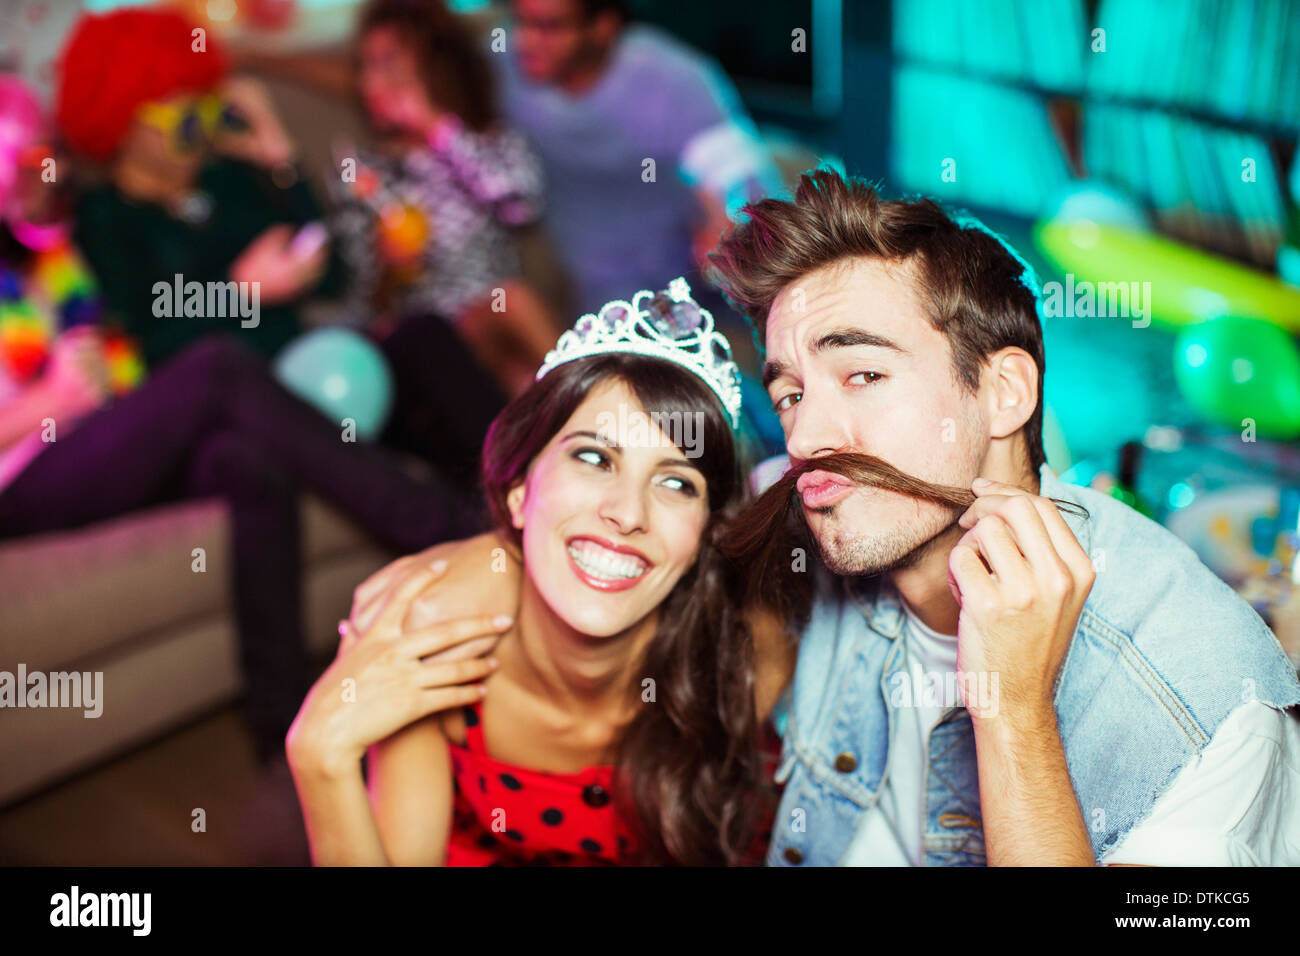 Smiling couple playing together at party Stock Photo